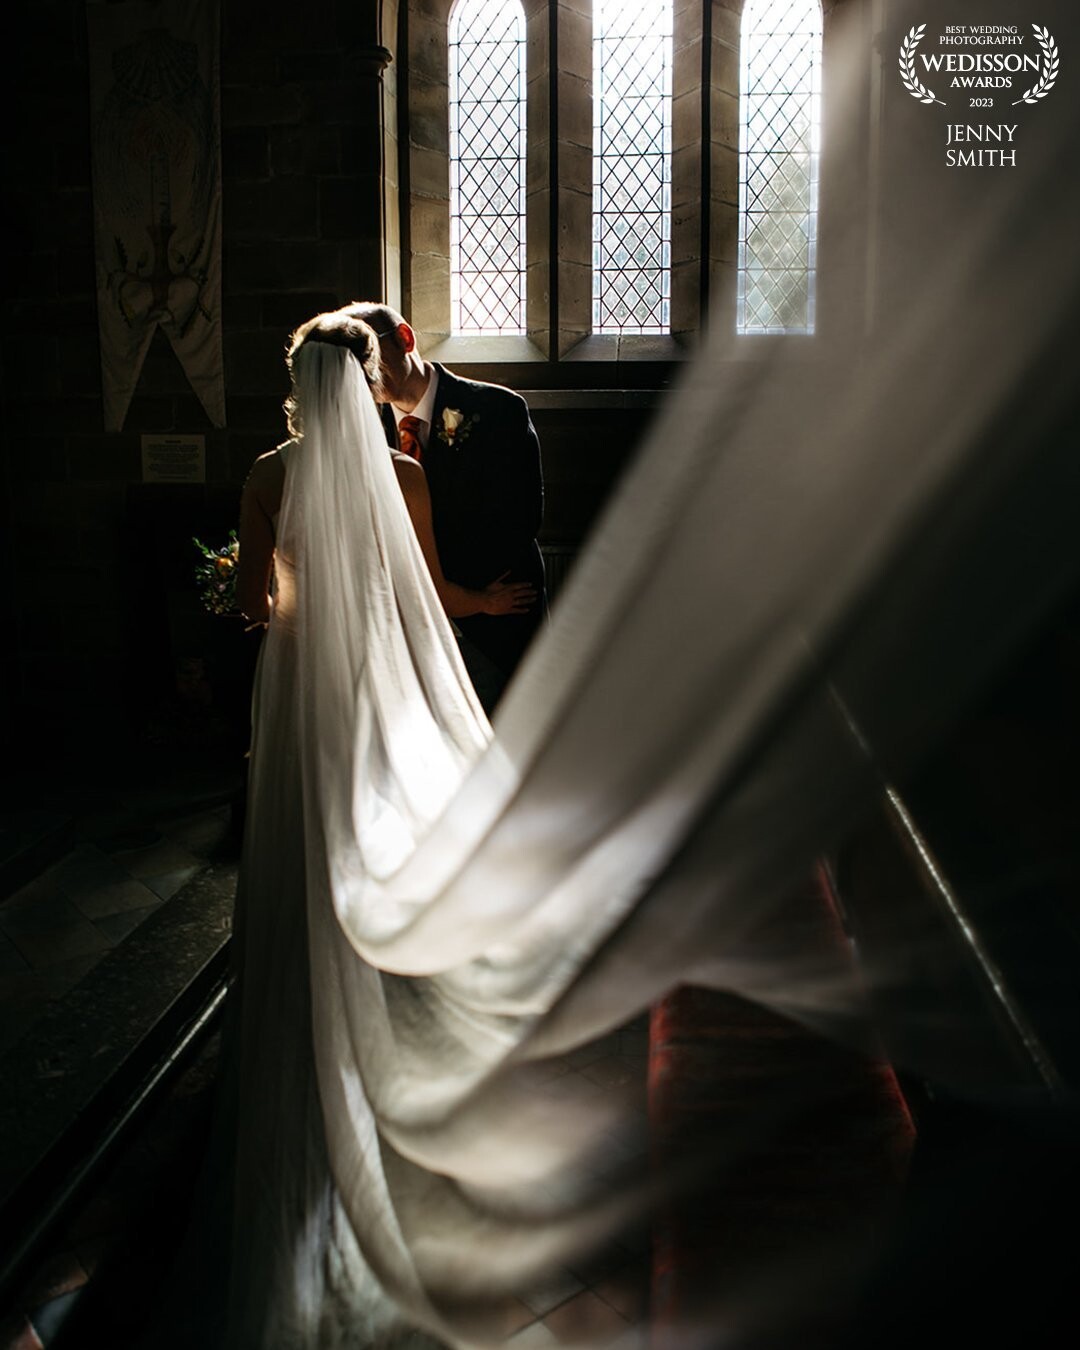 After the ceremony we went back into the church to take some portraits whilst the guests made their way to the reception. Being a sunny October day the afternoon sunlight flooded through the windows and the photos took on an ethereal quality.